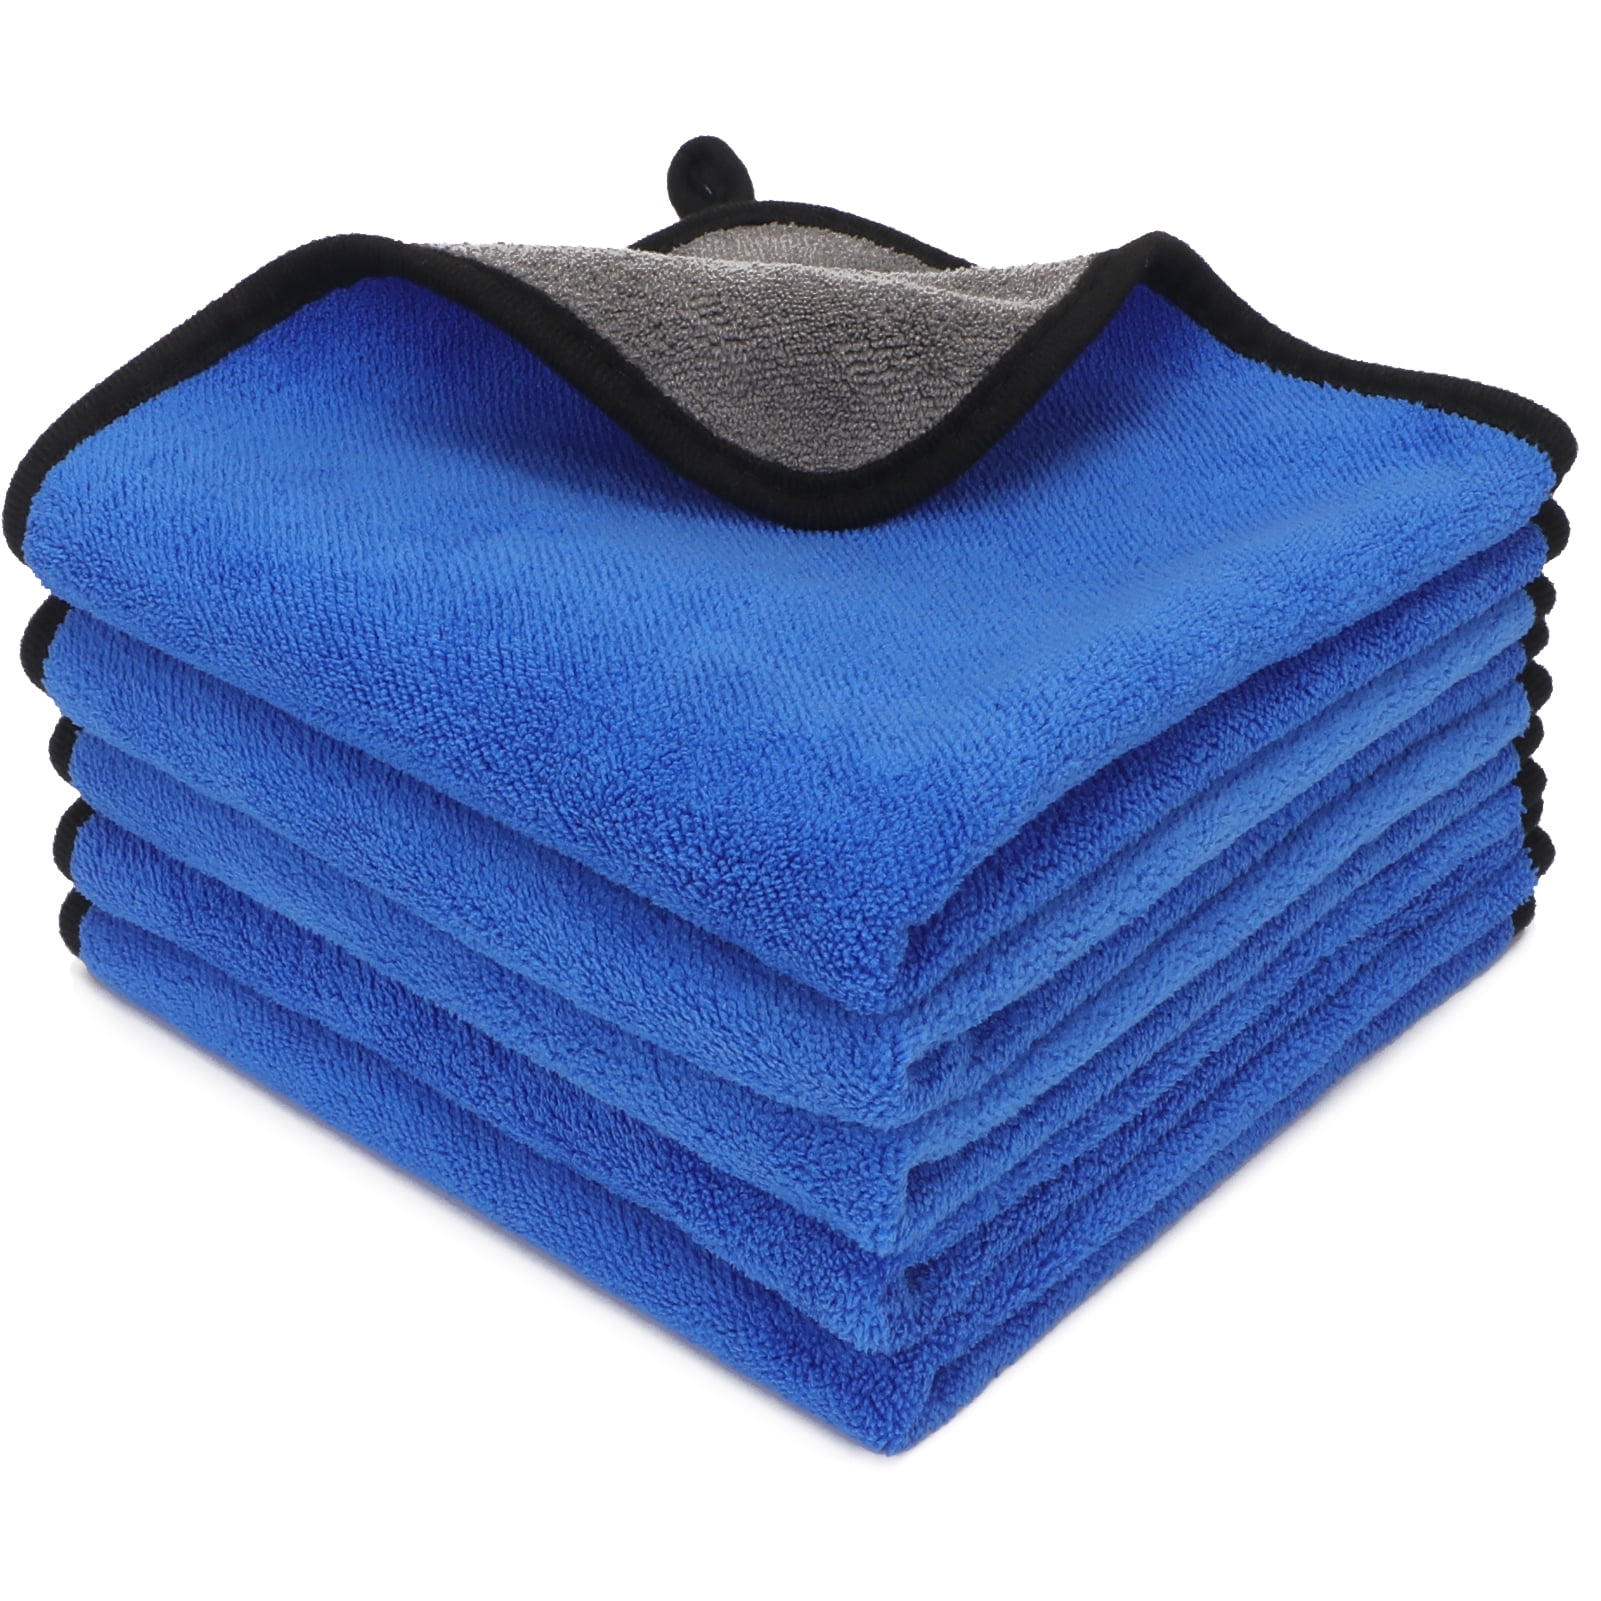 How Do You Properly Clean Microfiber Towels? - Skys The Limit Car Care